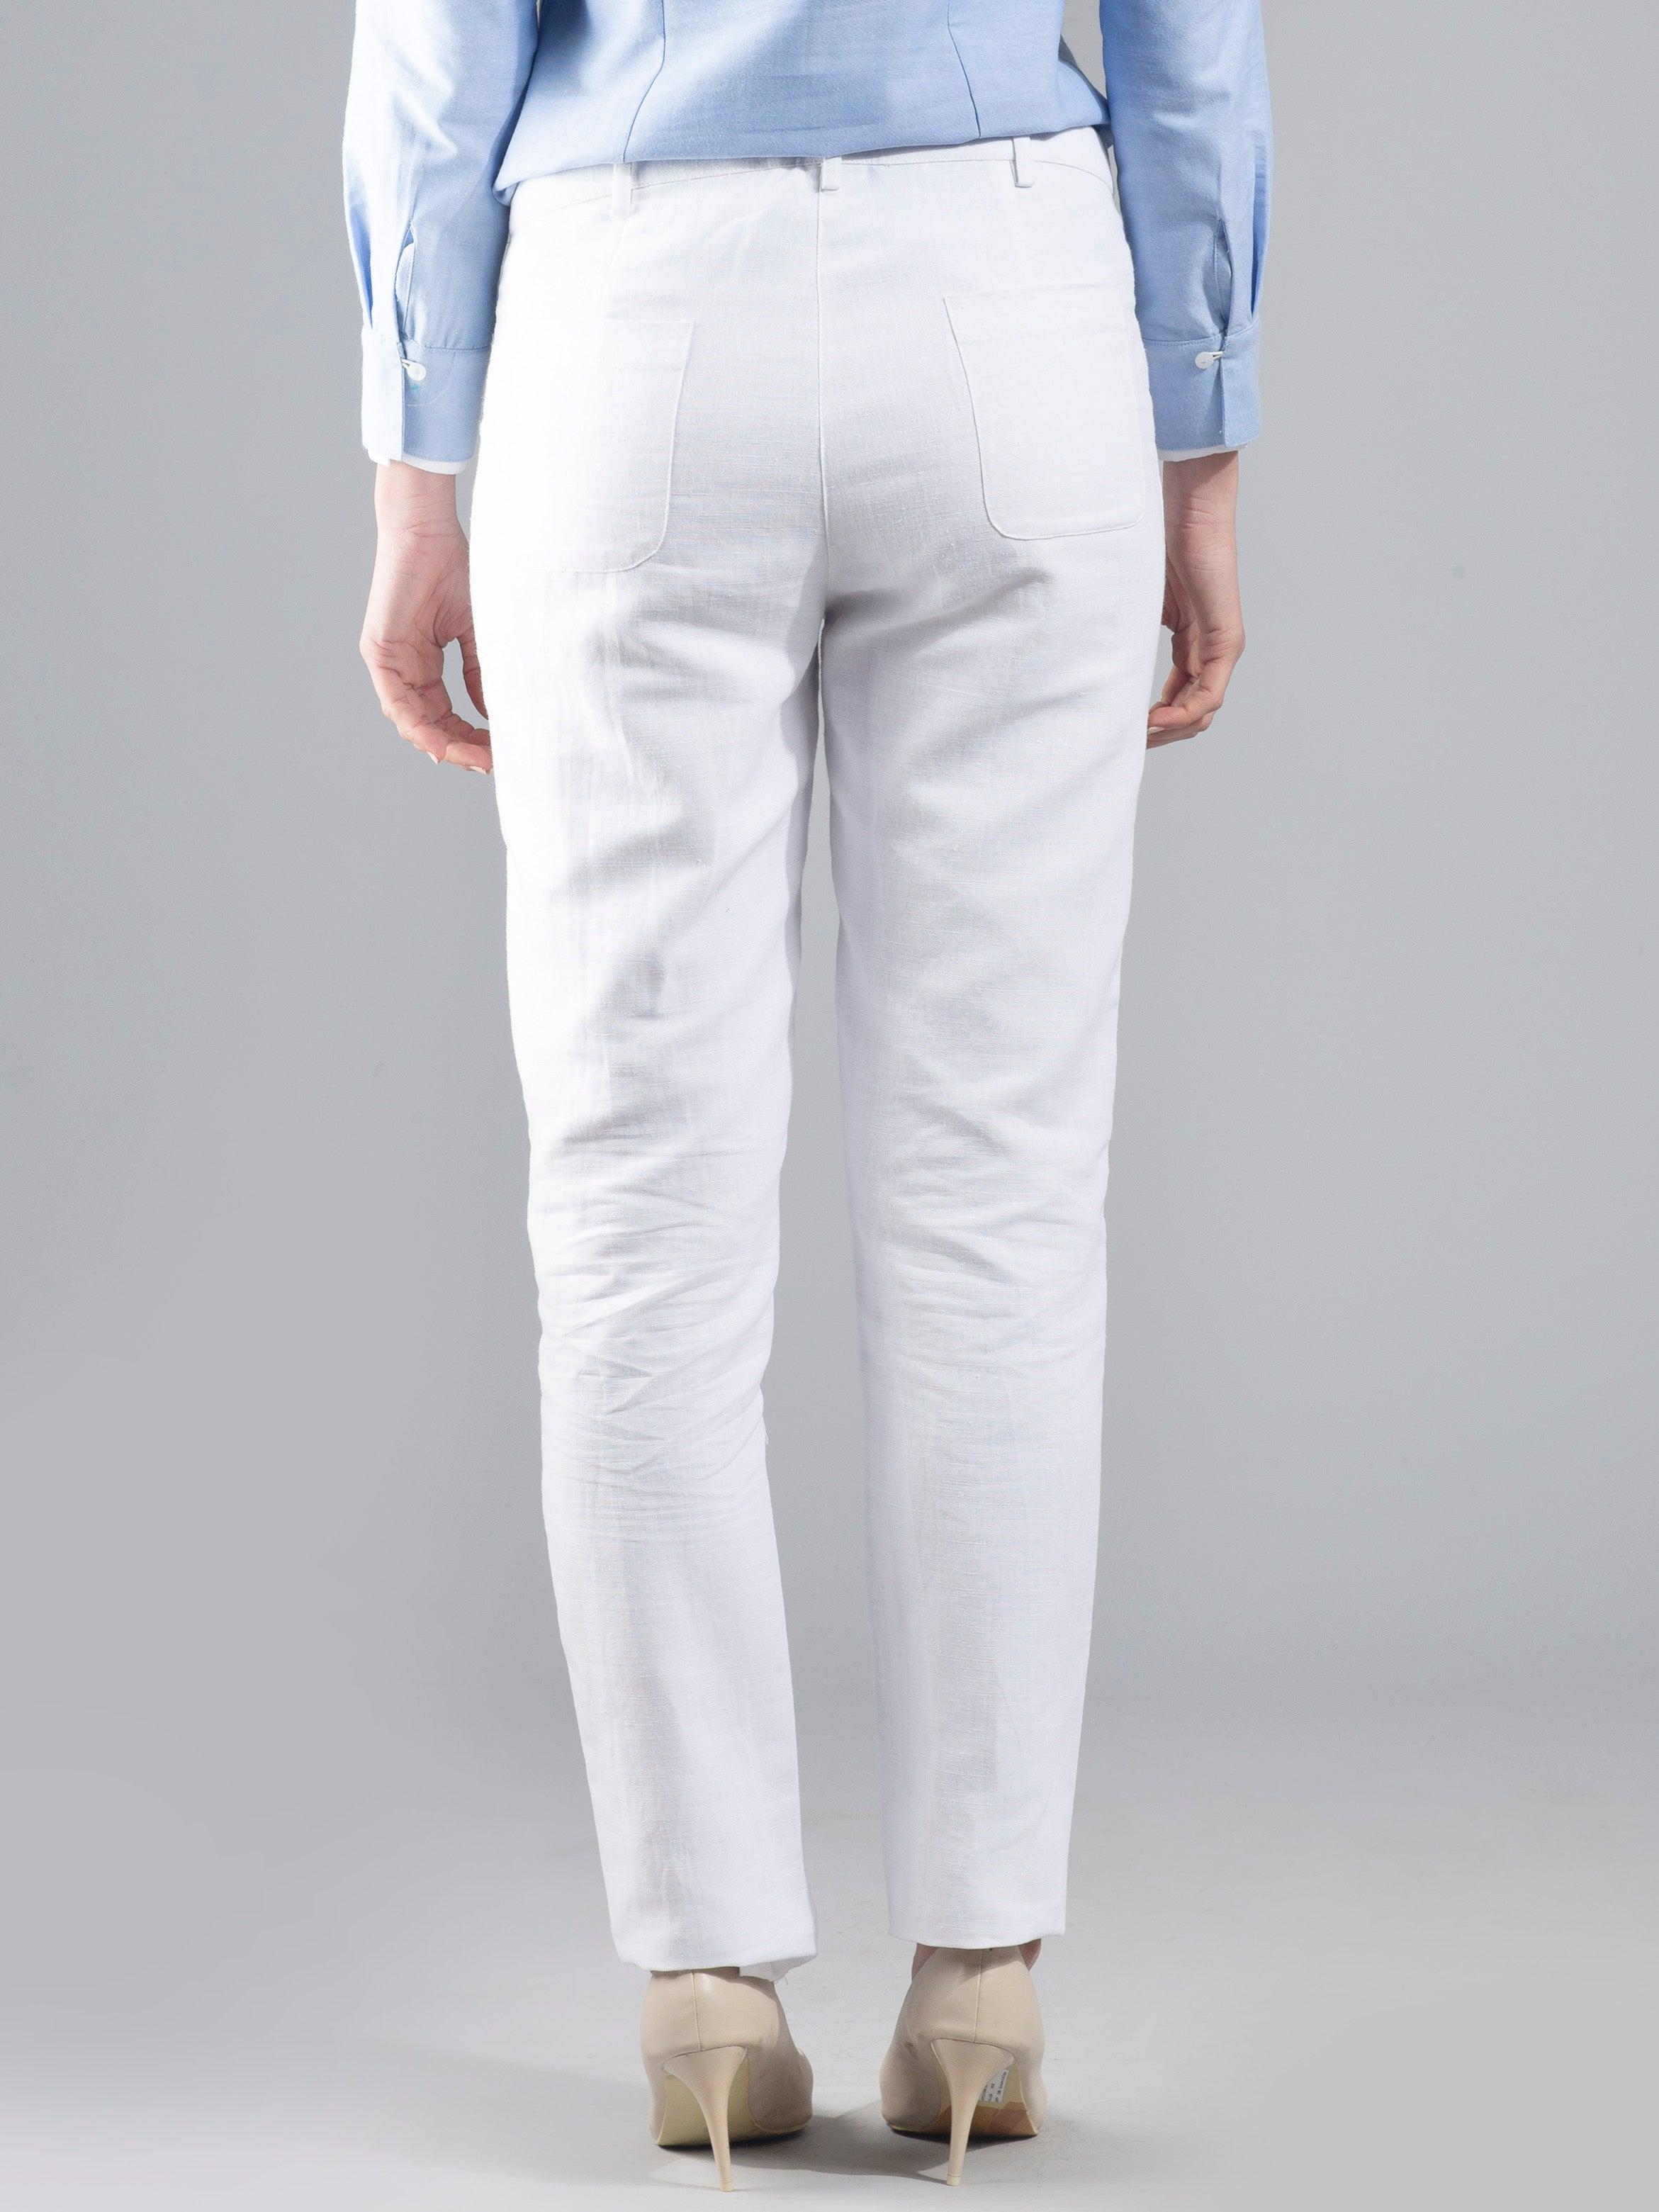 Essential Linen Trousers - White| Formal Trousers